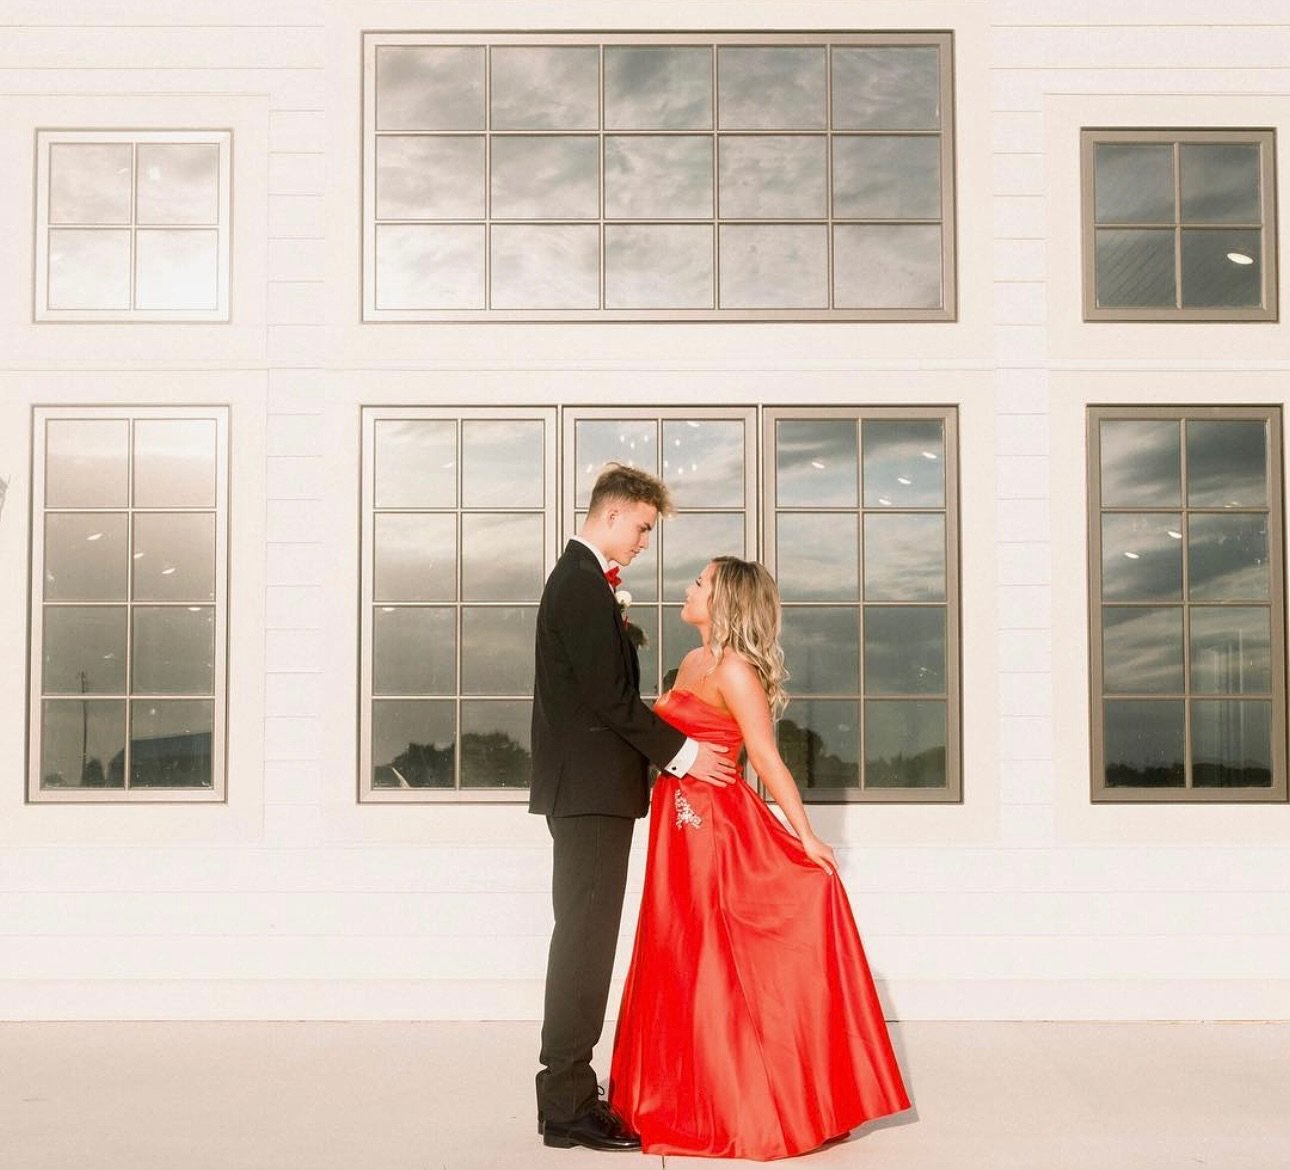 Looking for the perfect spot to take prom pics? Come by White Chateau any time on April 26th and 27th to capture the day!